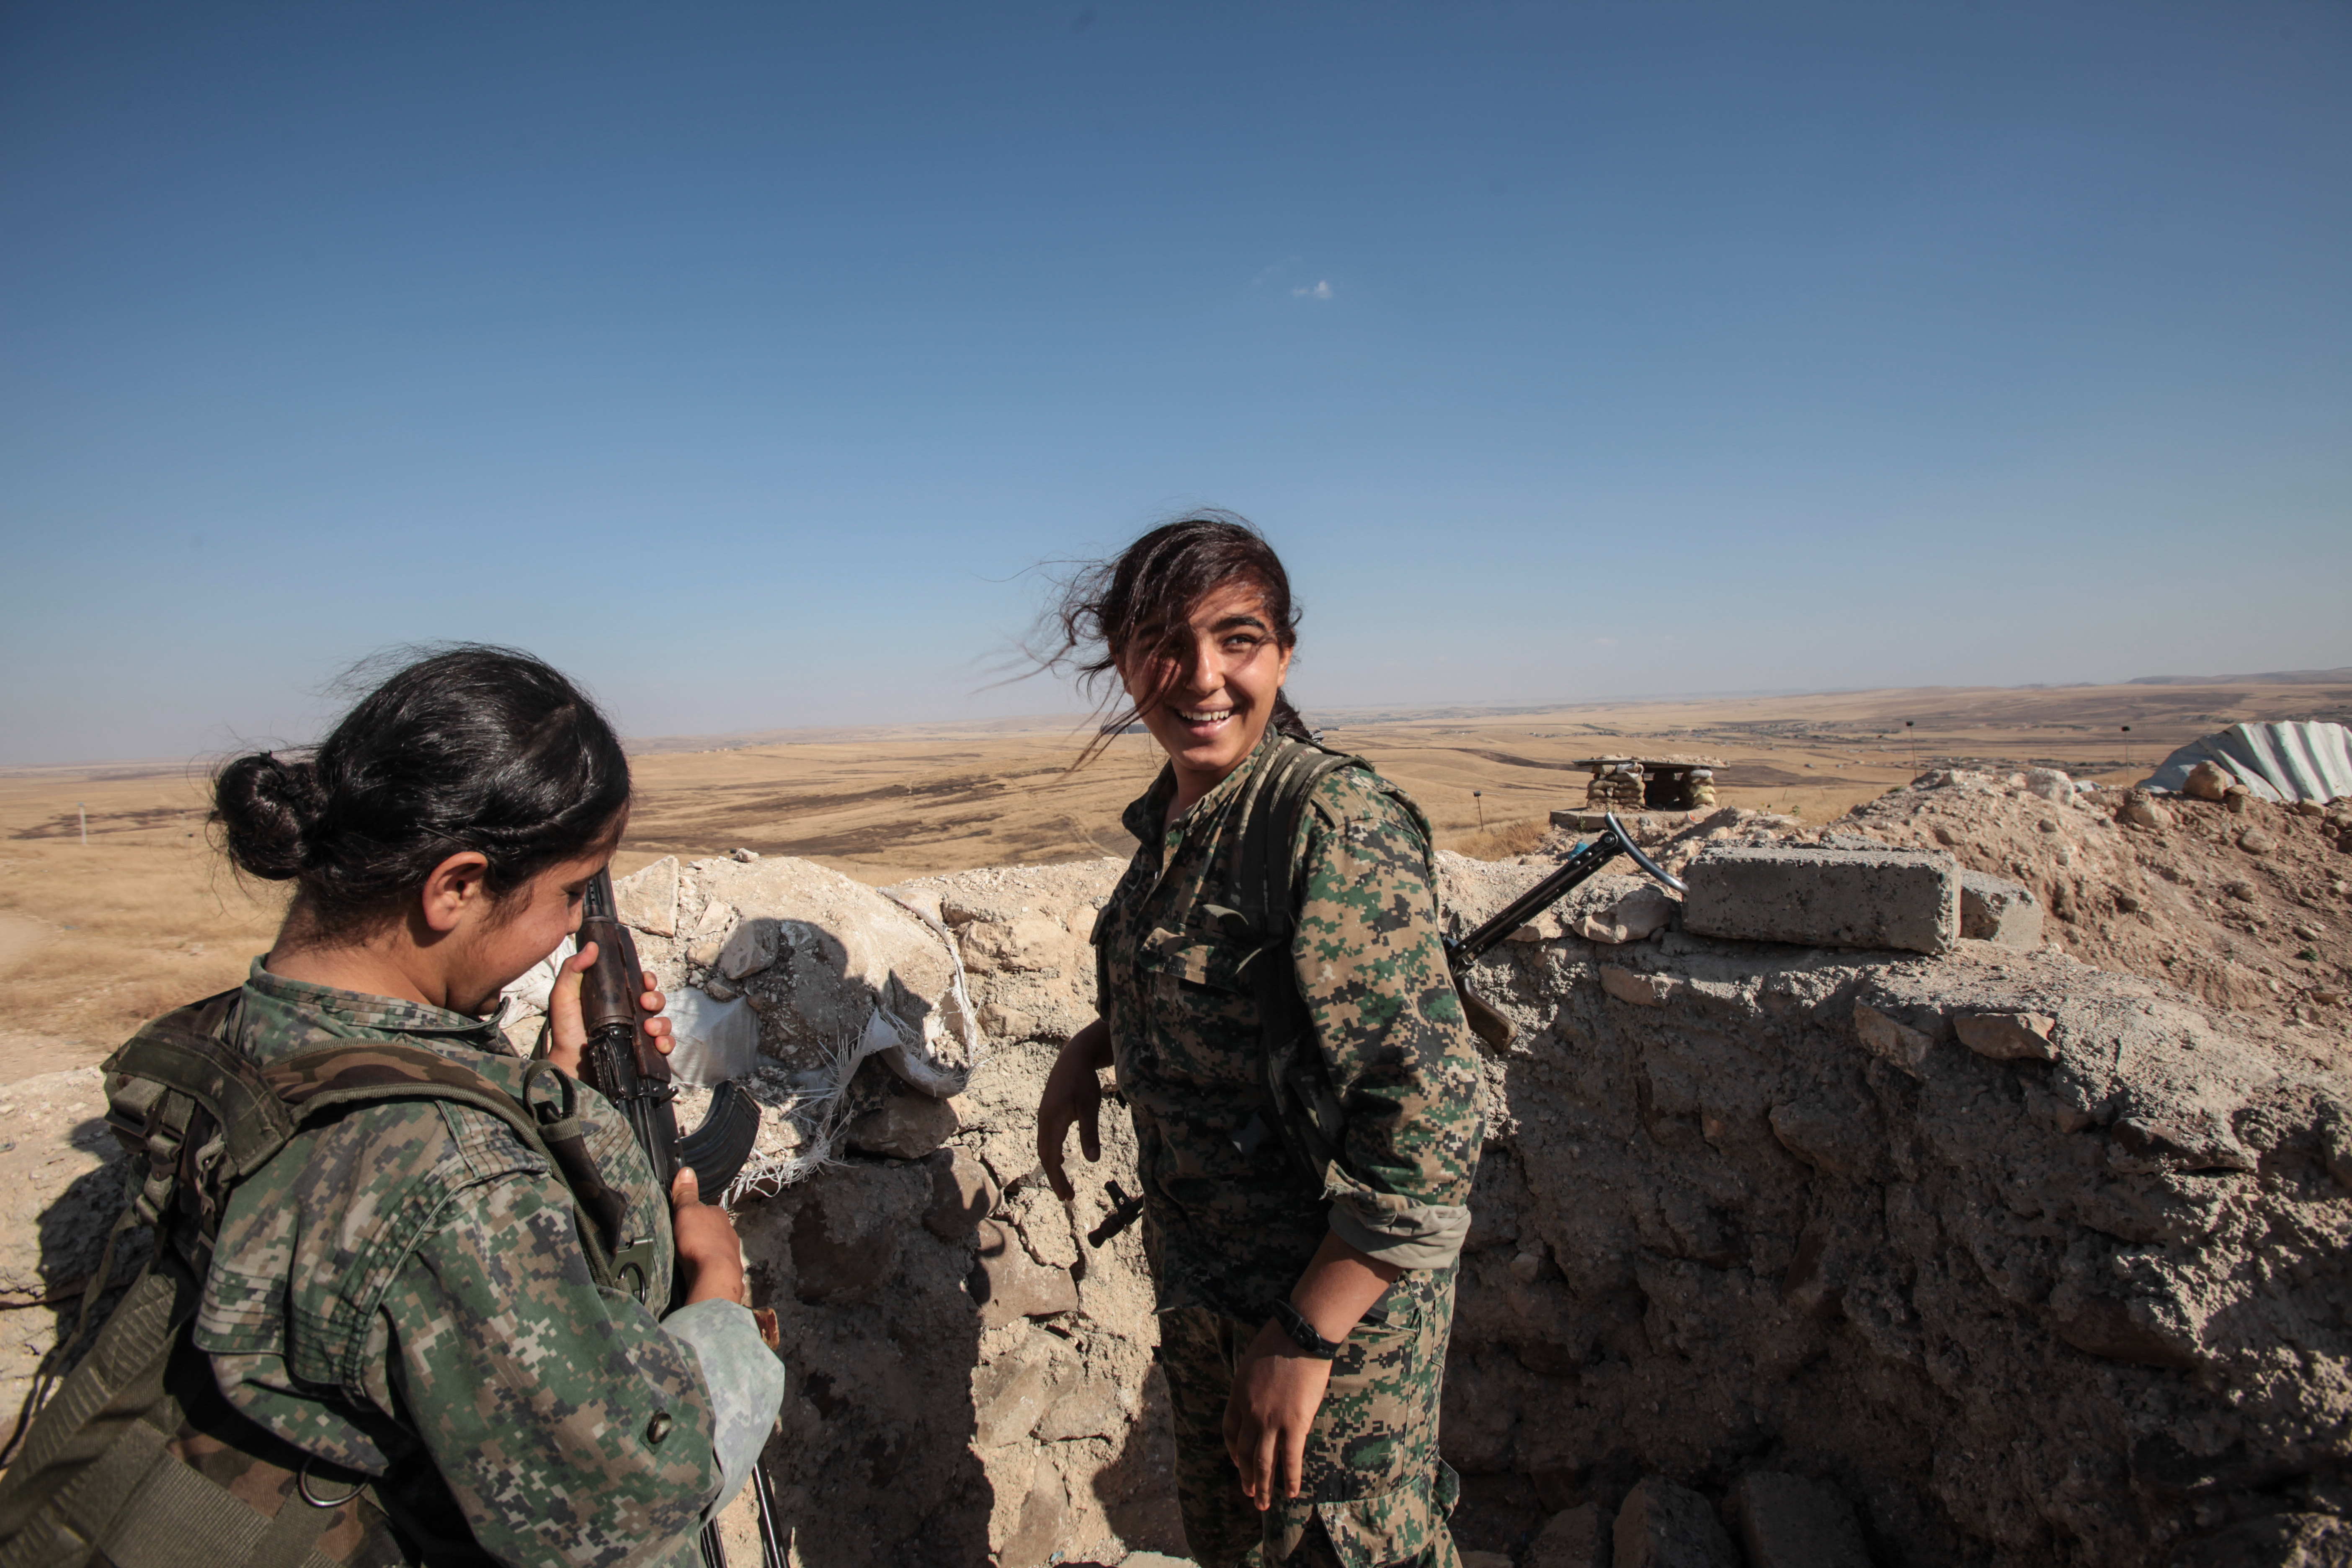 Kurdish People's Protection Units, or YPG's women fighters pose as they stand in a check point with their AK-47 at the outskirts of the destroyed Syrian town of Kobane, also known as Ain al-Arab, Syria. June 20, 2015. Kurdish fighters with the YPG took full control of Kobane and strategic city of Tal Abyad, dealing a major blow to the Islamic State group's ability to wage war in Syria. Mopping up operations have started to make the town safe for the return of residents from Turkey, after more than a year of Islamic State militants holding control of the town. (Photo by Ahmet Sik/Getty Images)